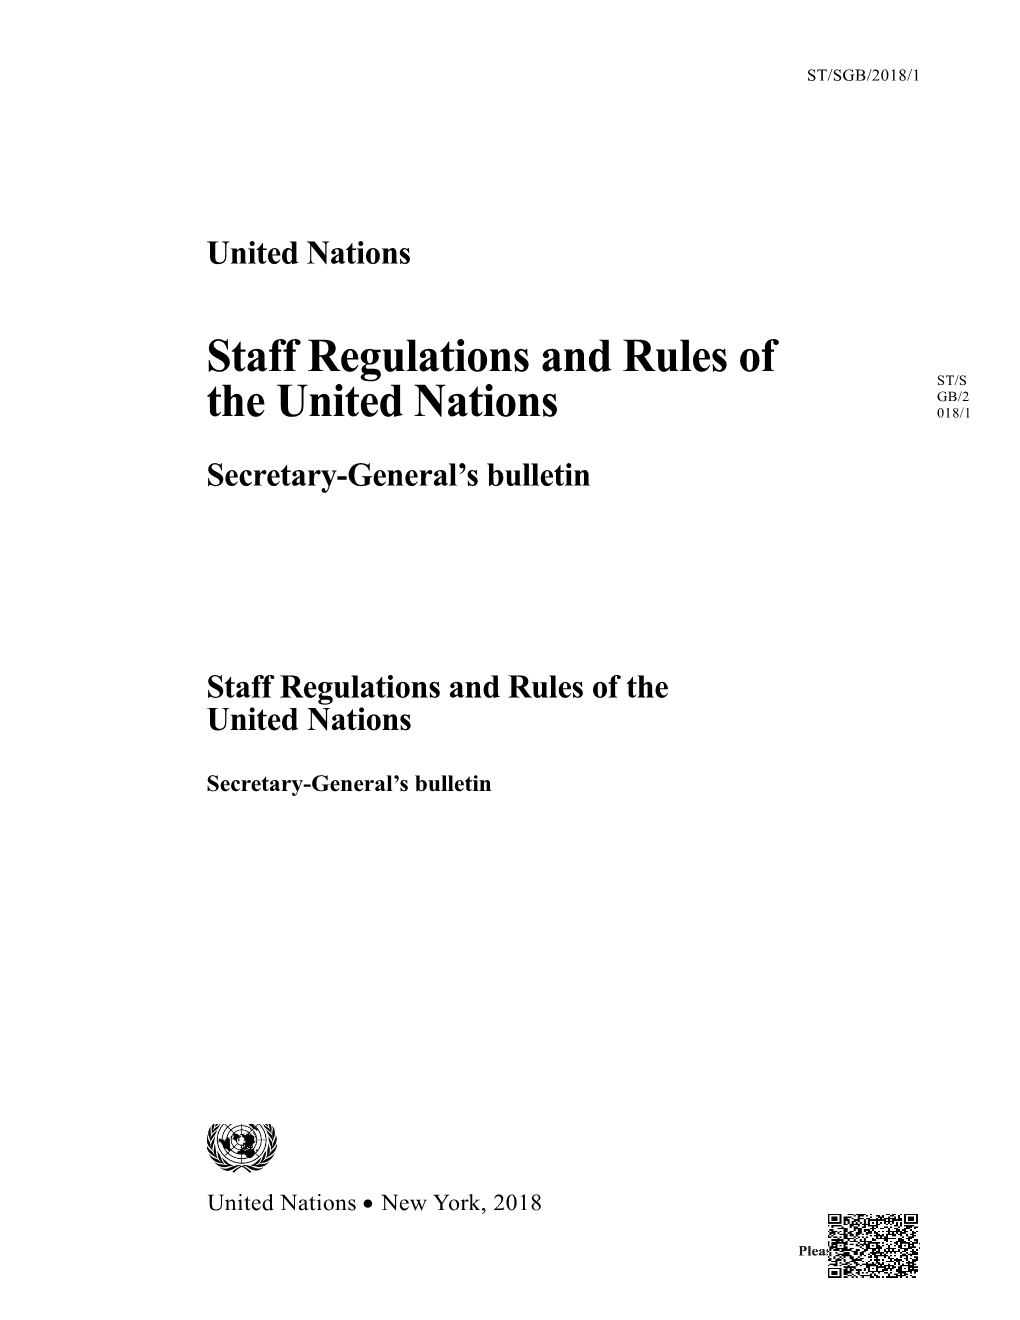 Staff Regulations and Rules of the United Nations s1